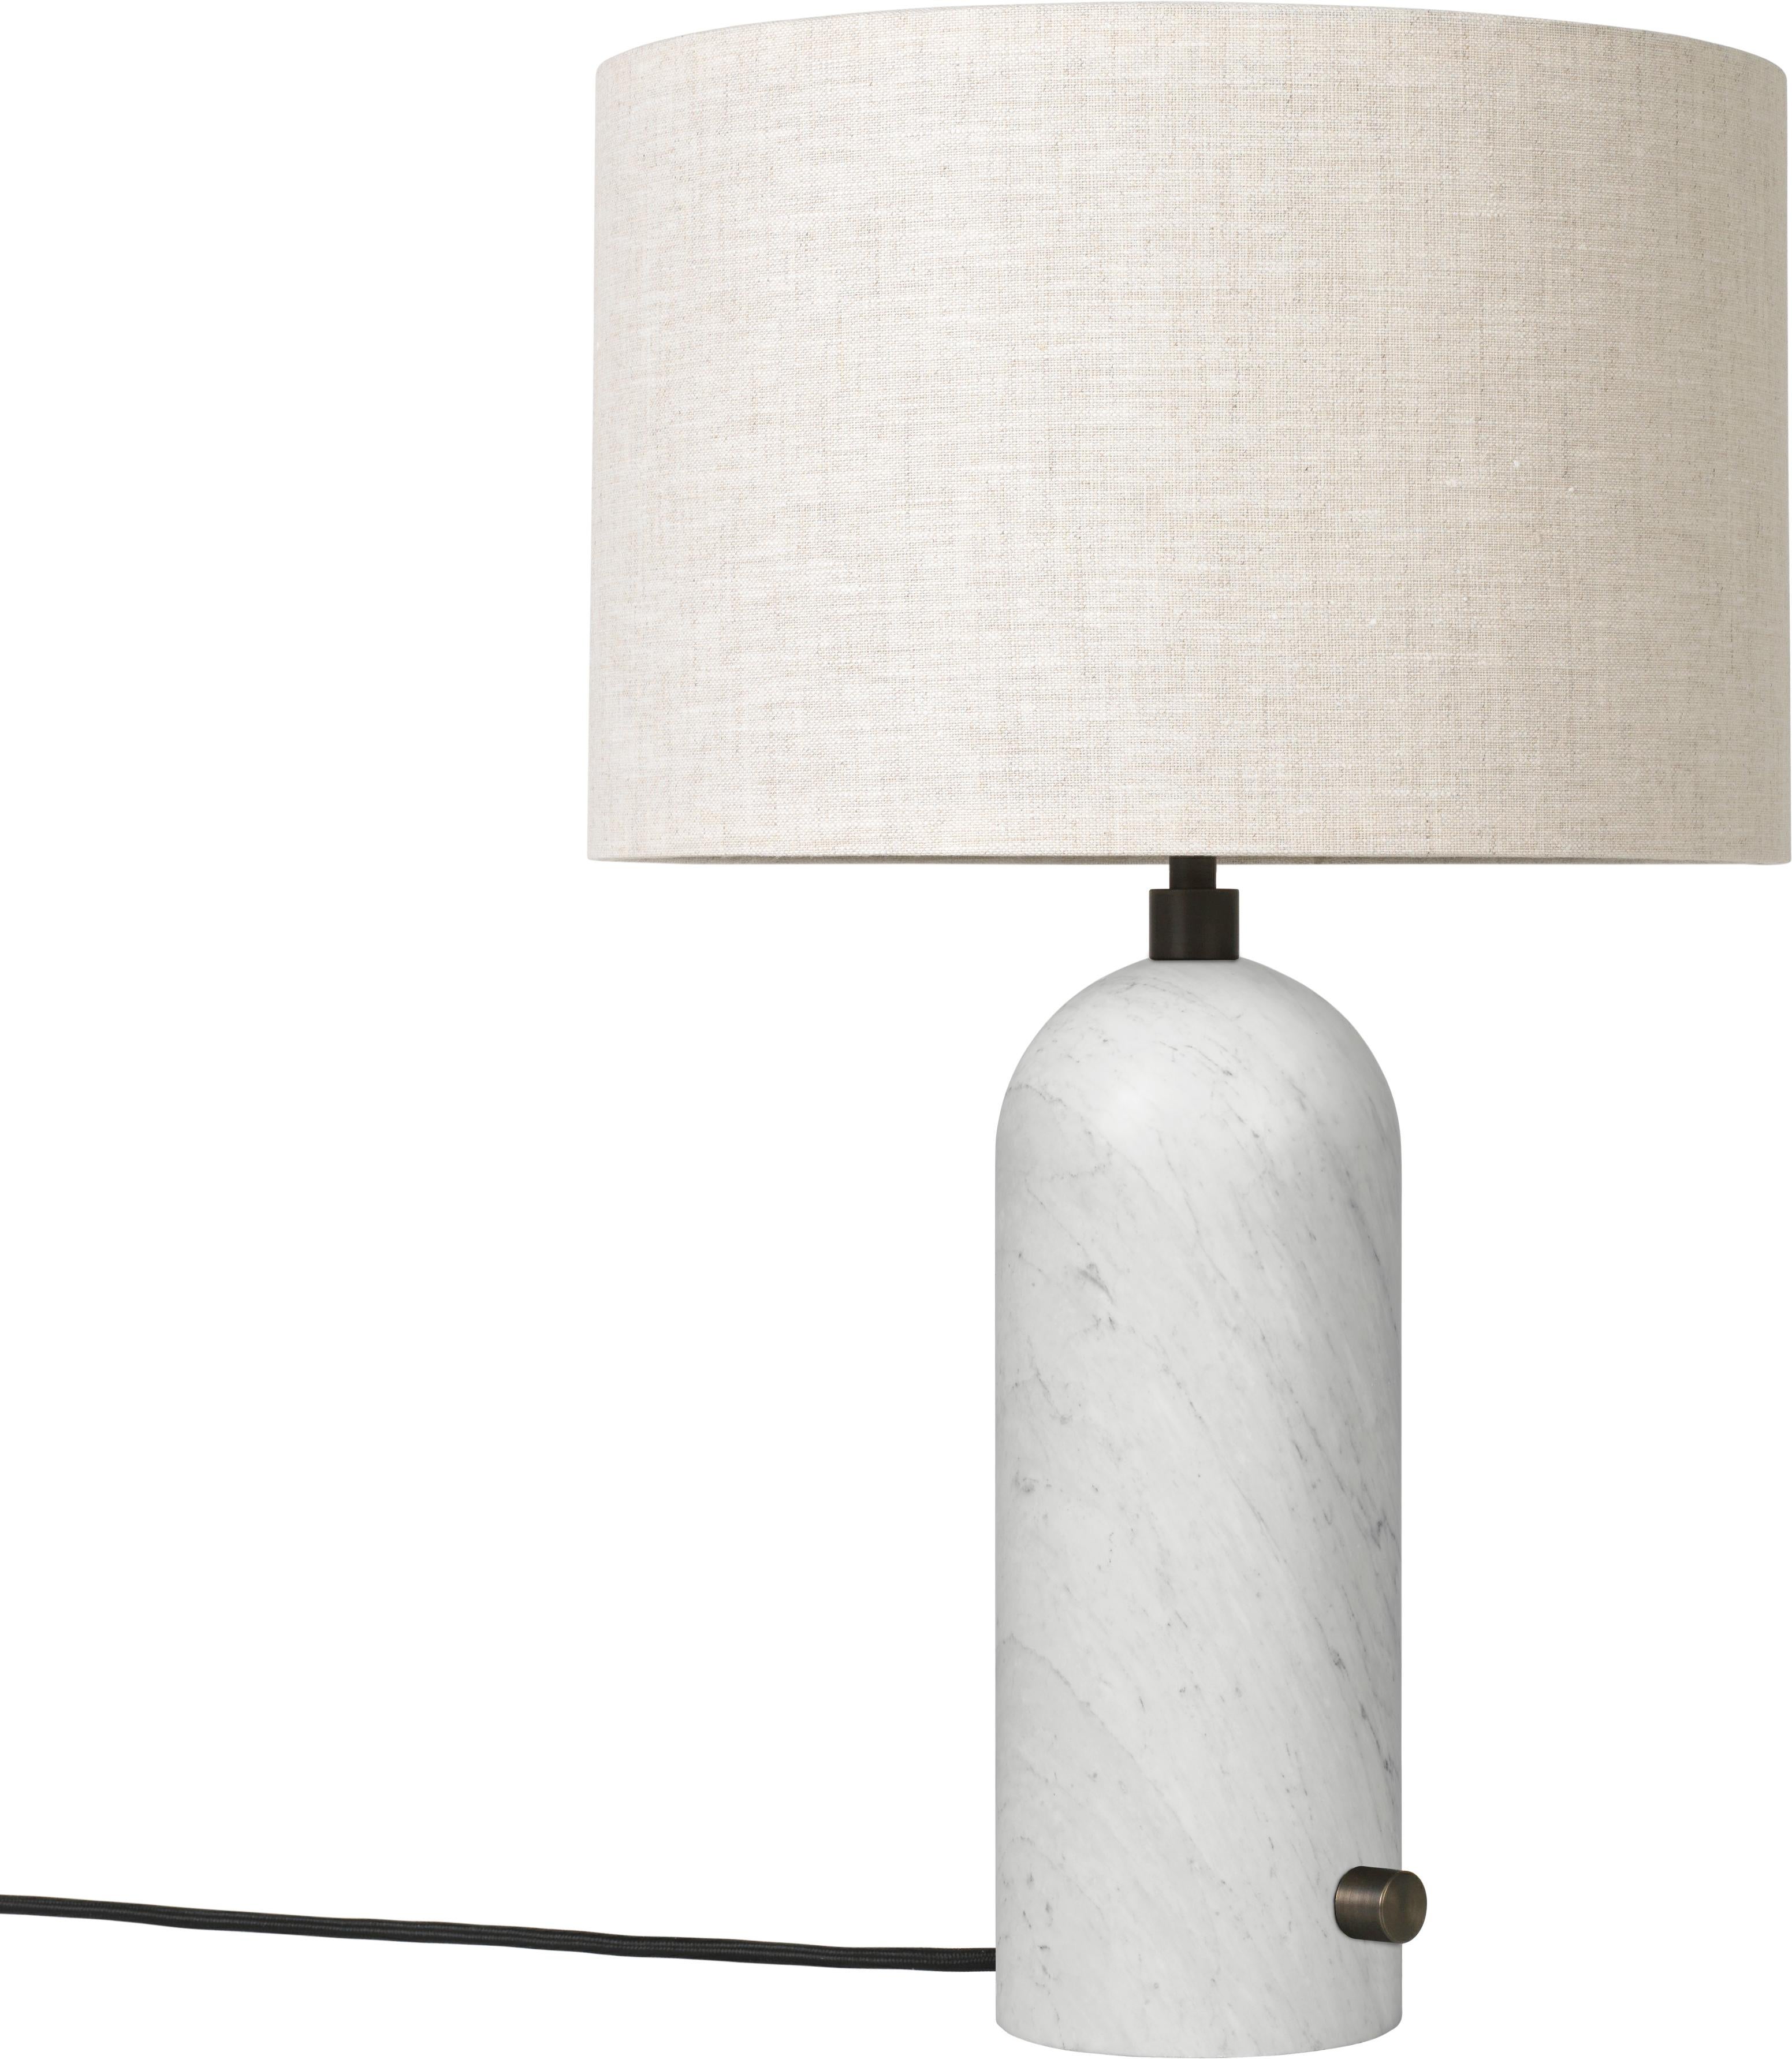 Large 'Gravity' Blackened Steel Table Lamp by Space Copenhagen for Gubi For Sale 9